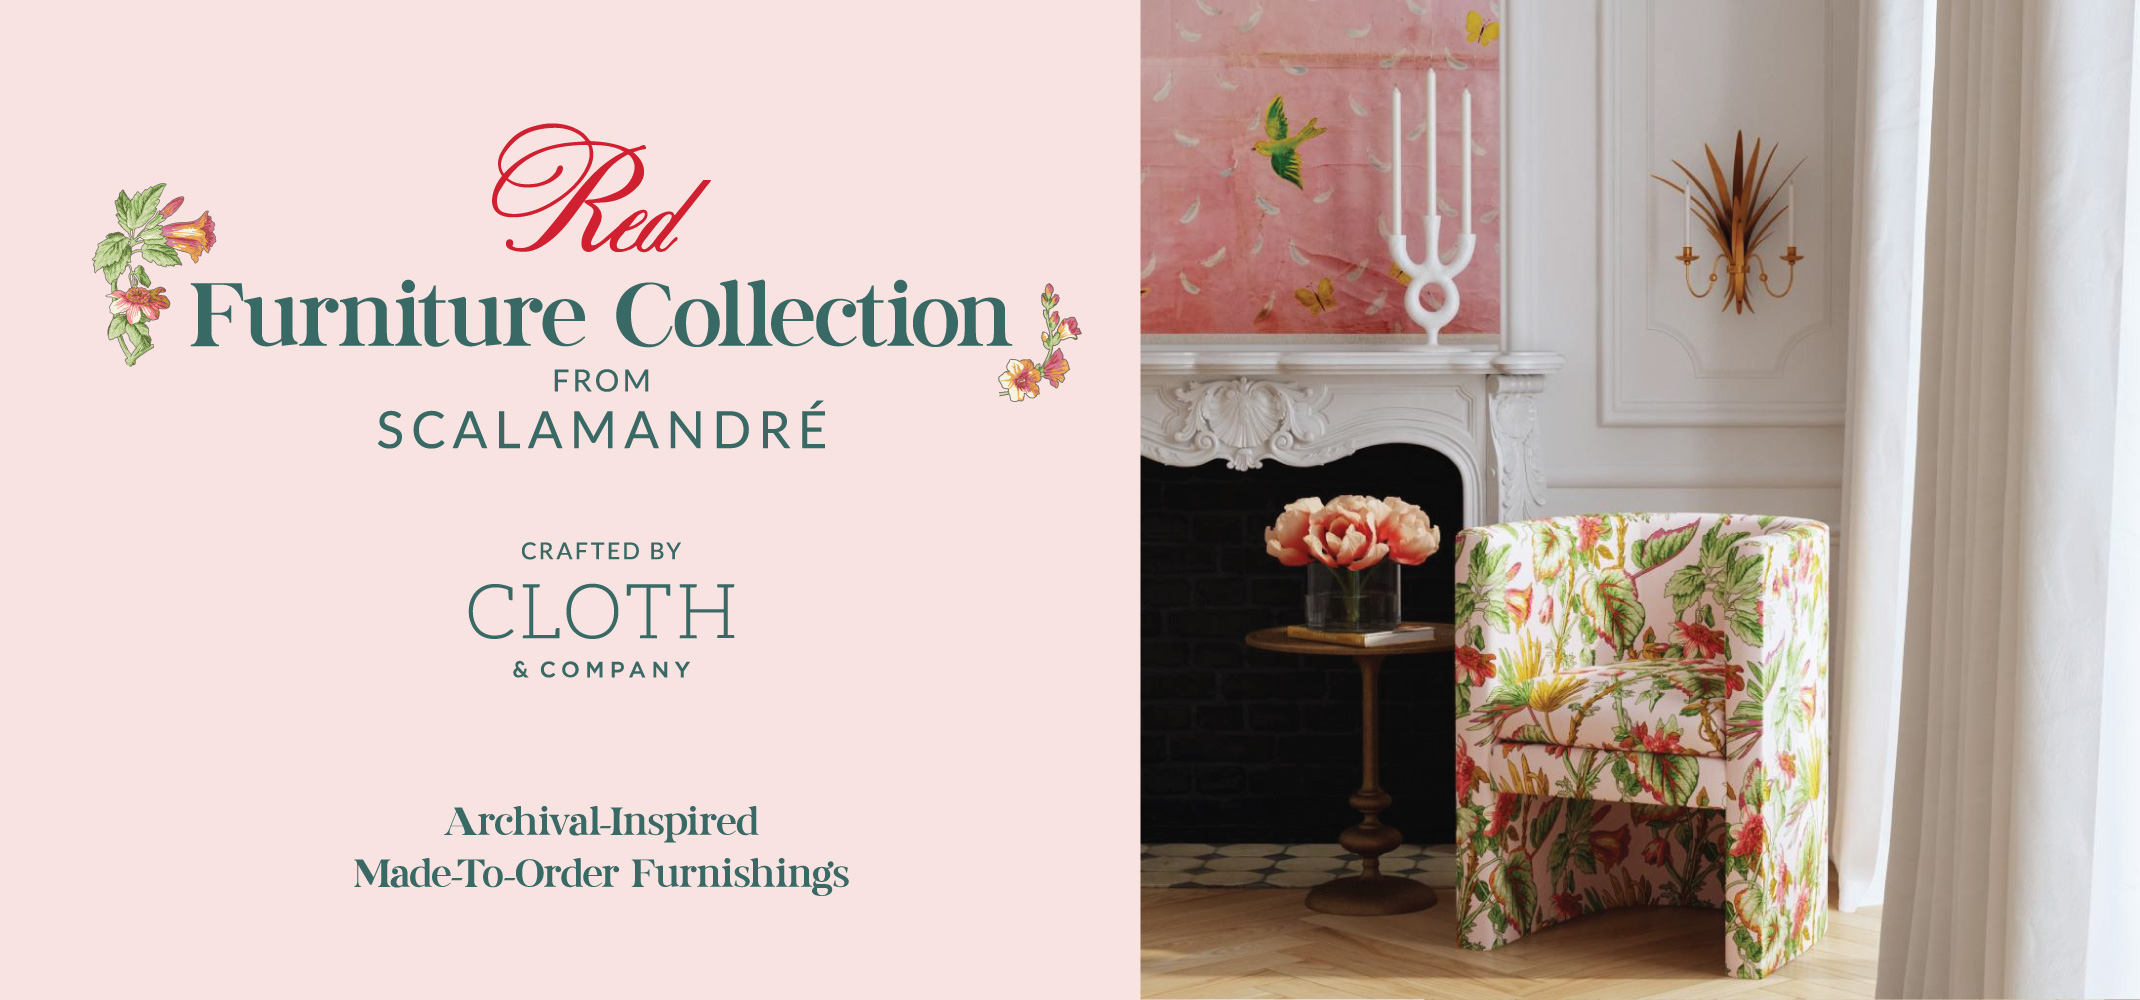 Red Furniture Collection Crafted by Cloth and Co.